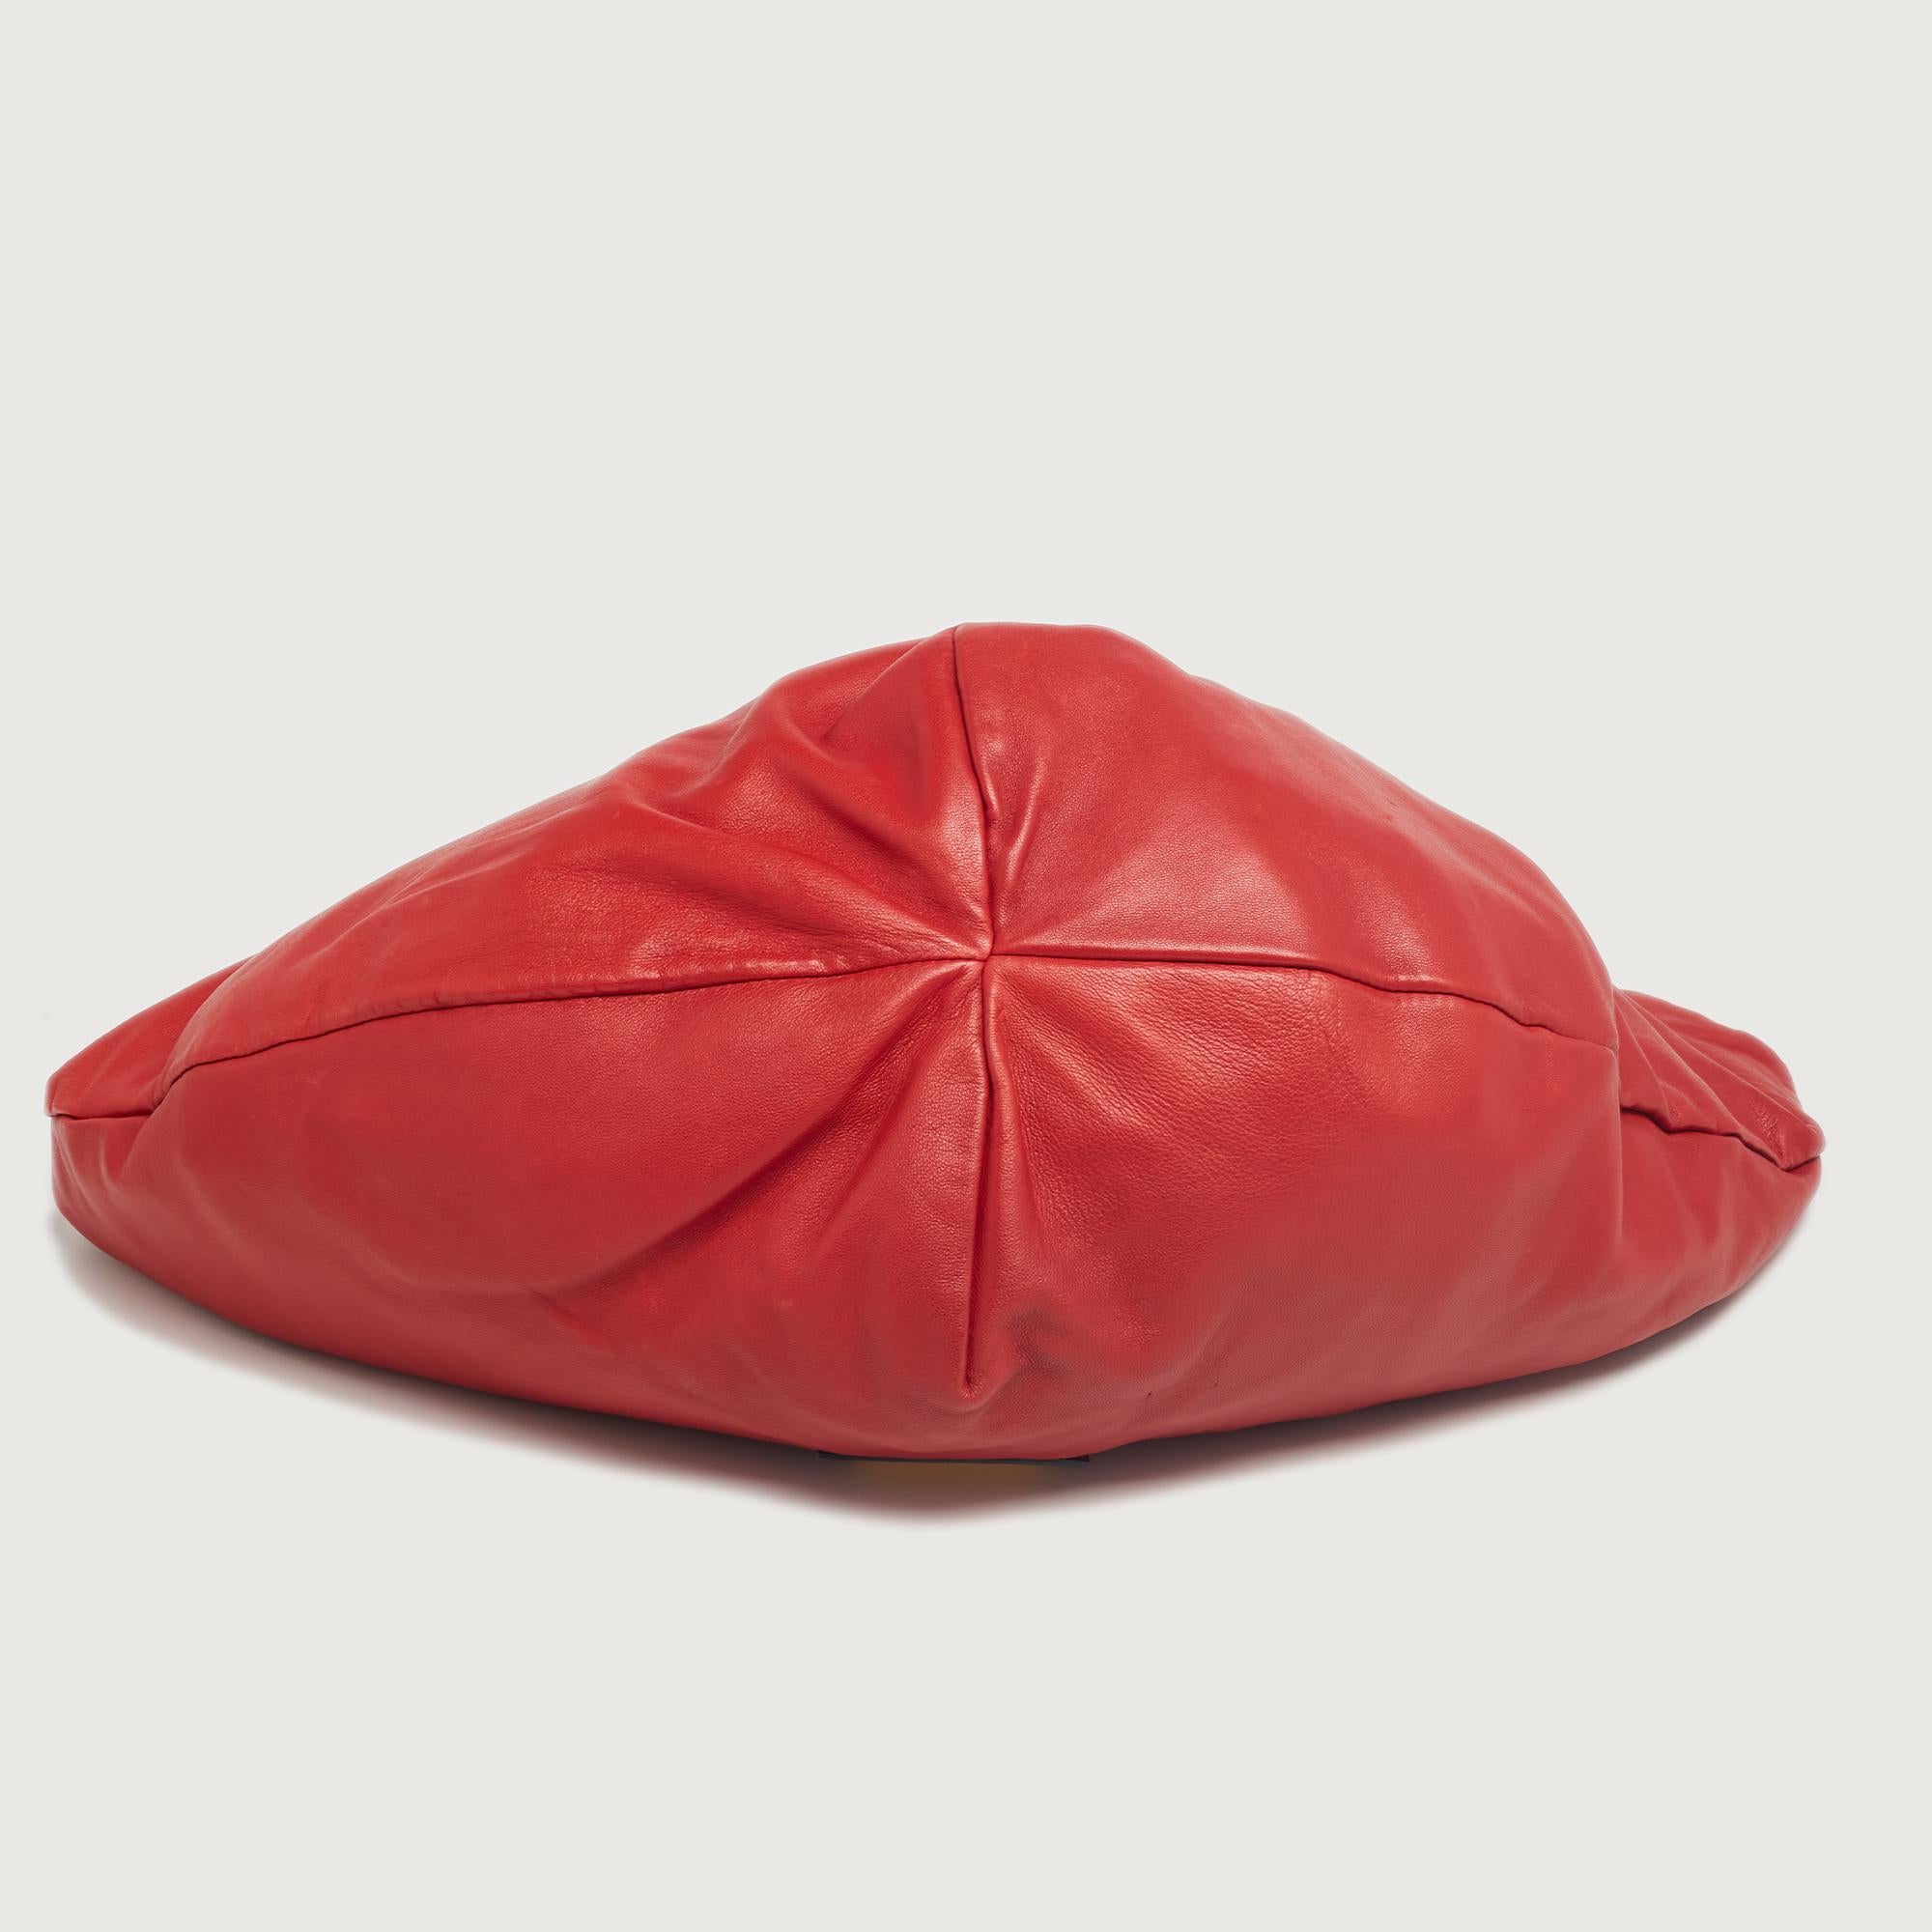 red valentino bow bag